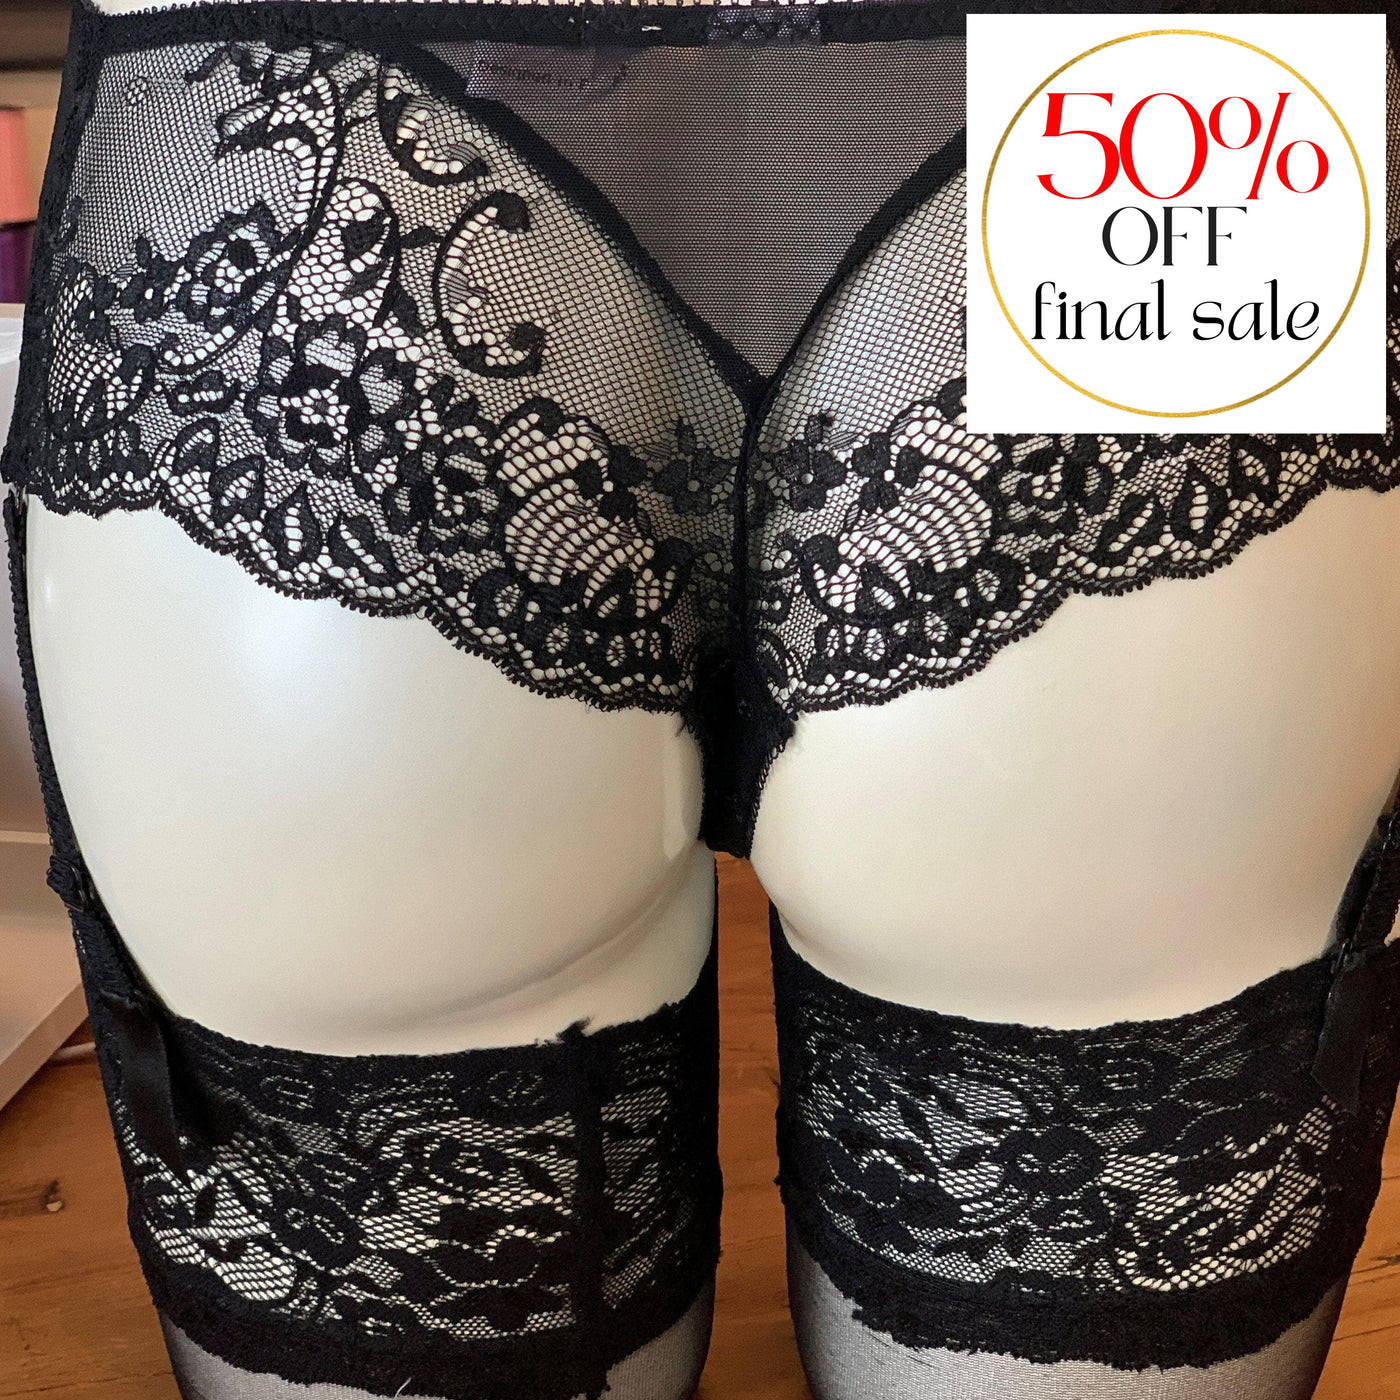 Empreinte Ginger Tanga with Removable Garters in Black 01207-Panties-Empreinte-Black-XSmall-Anna Bella Fine Lingerie, Reveal Your Most Gorgeous Self!